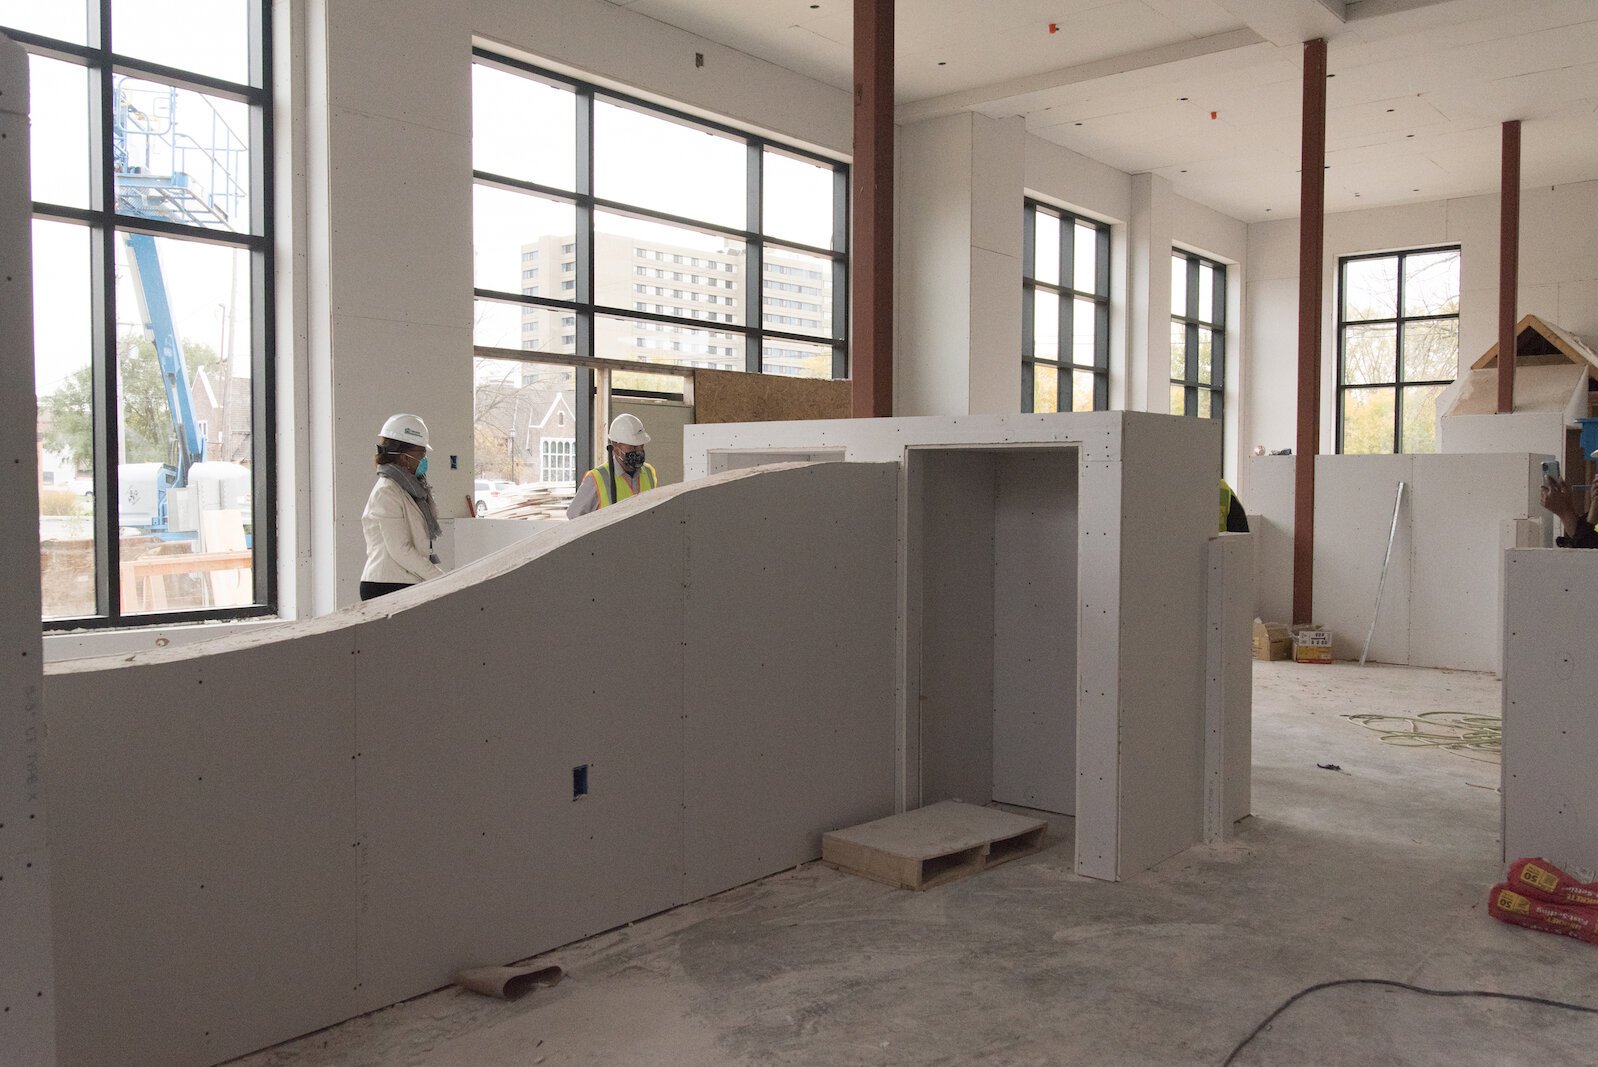 The YWCA Edison Children’s Center on Tuesday, Oct. 20, 2020. The 24-hour early learning center will use about 7,000 square feet of space on the ground- and mezzanine levels of The Creamery building on Portage Street at Lake Street.